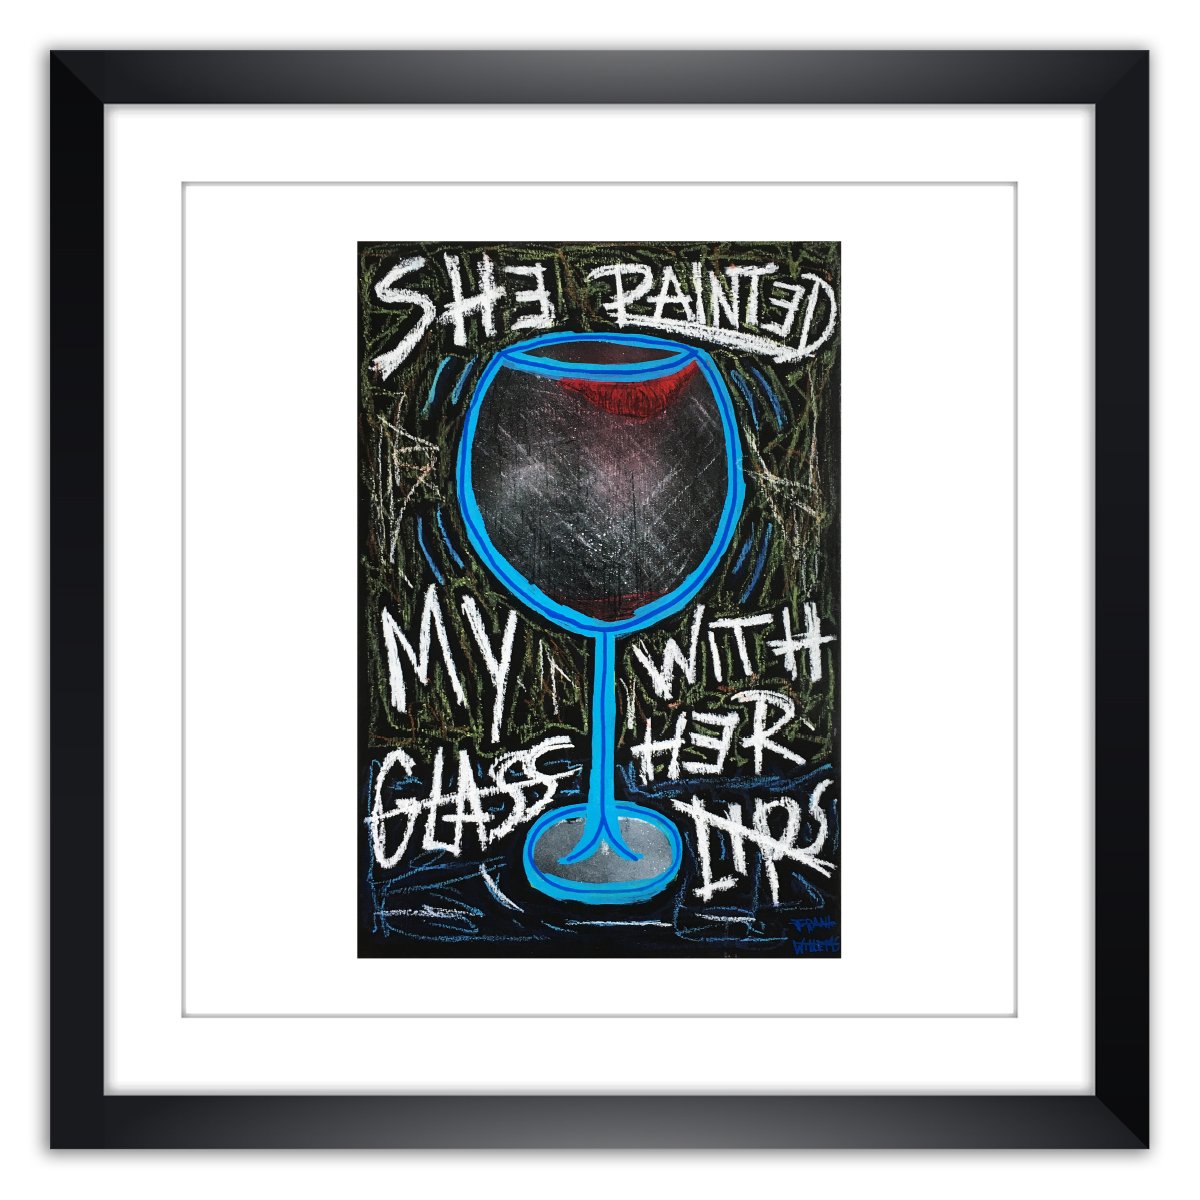 Limited prints - SHE PAINTED MY GLASS WITH HER LIPS framed - Frank Willems